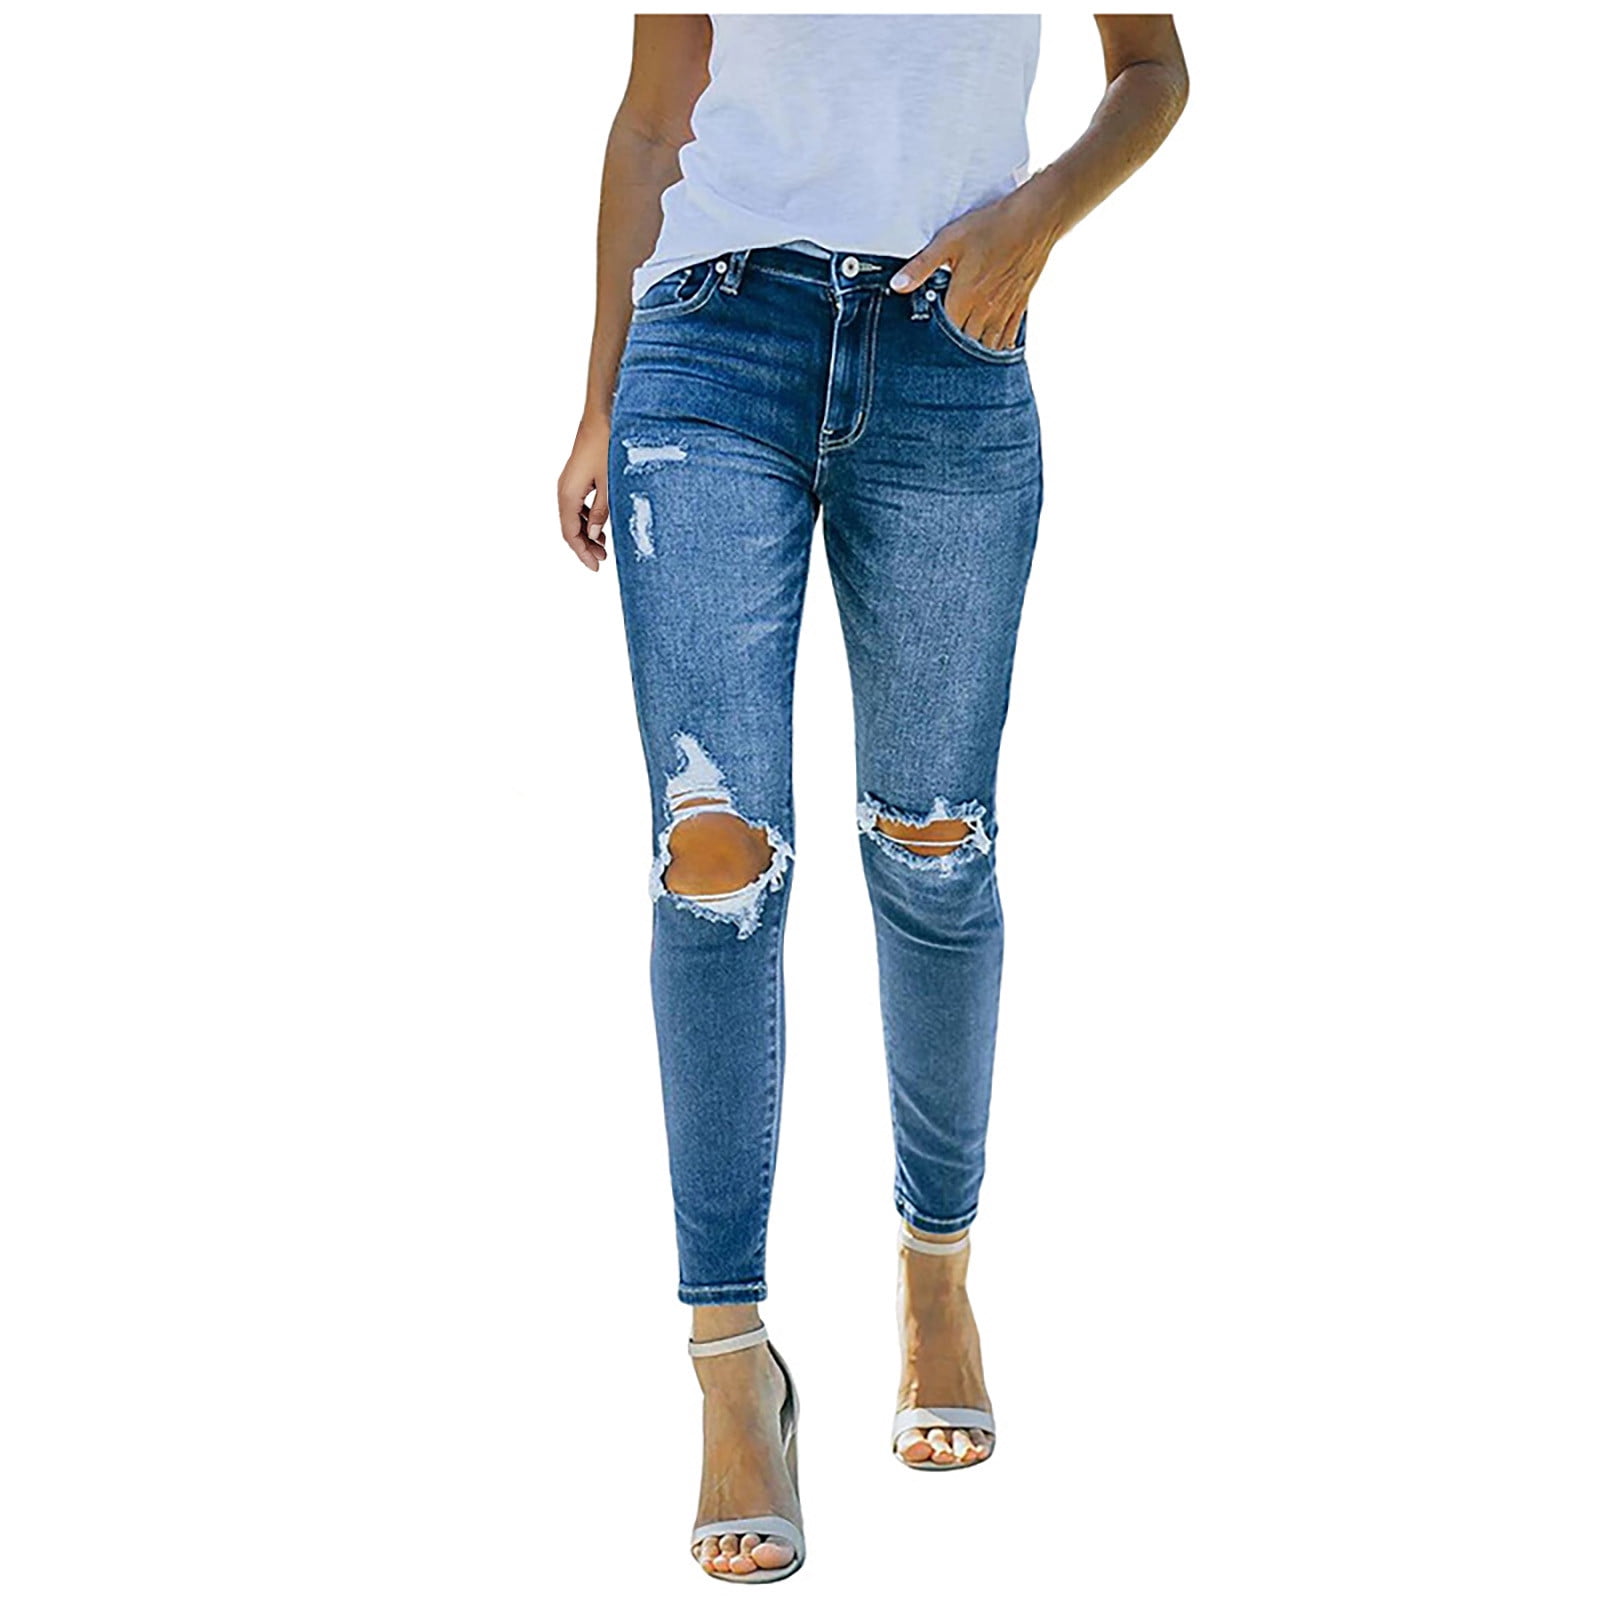 RYRJJ Women's Skinny Jeans with Buttons Solid Color Casual Butt Lift  Stretchy Denim Pants High Waisted Slim Fit Jeans with Pockets(Blue,S) -  Walmart.com